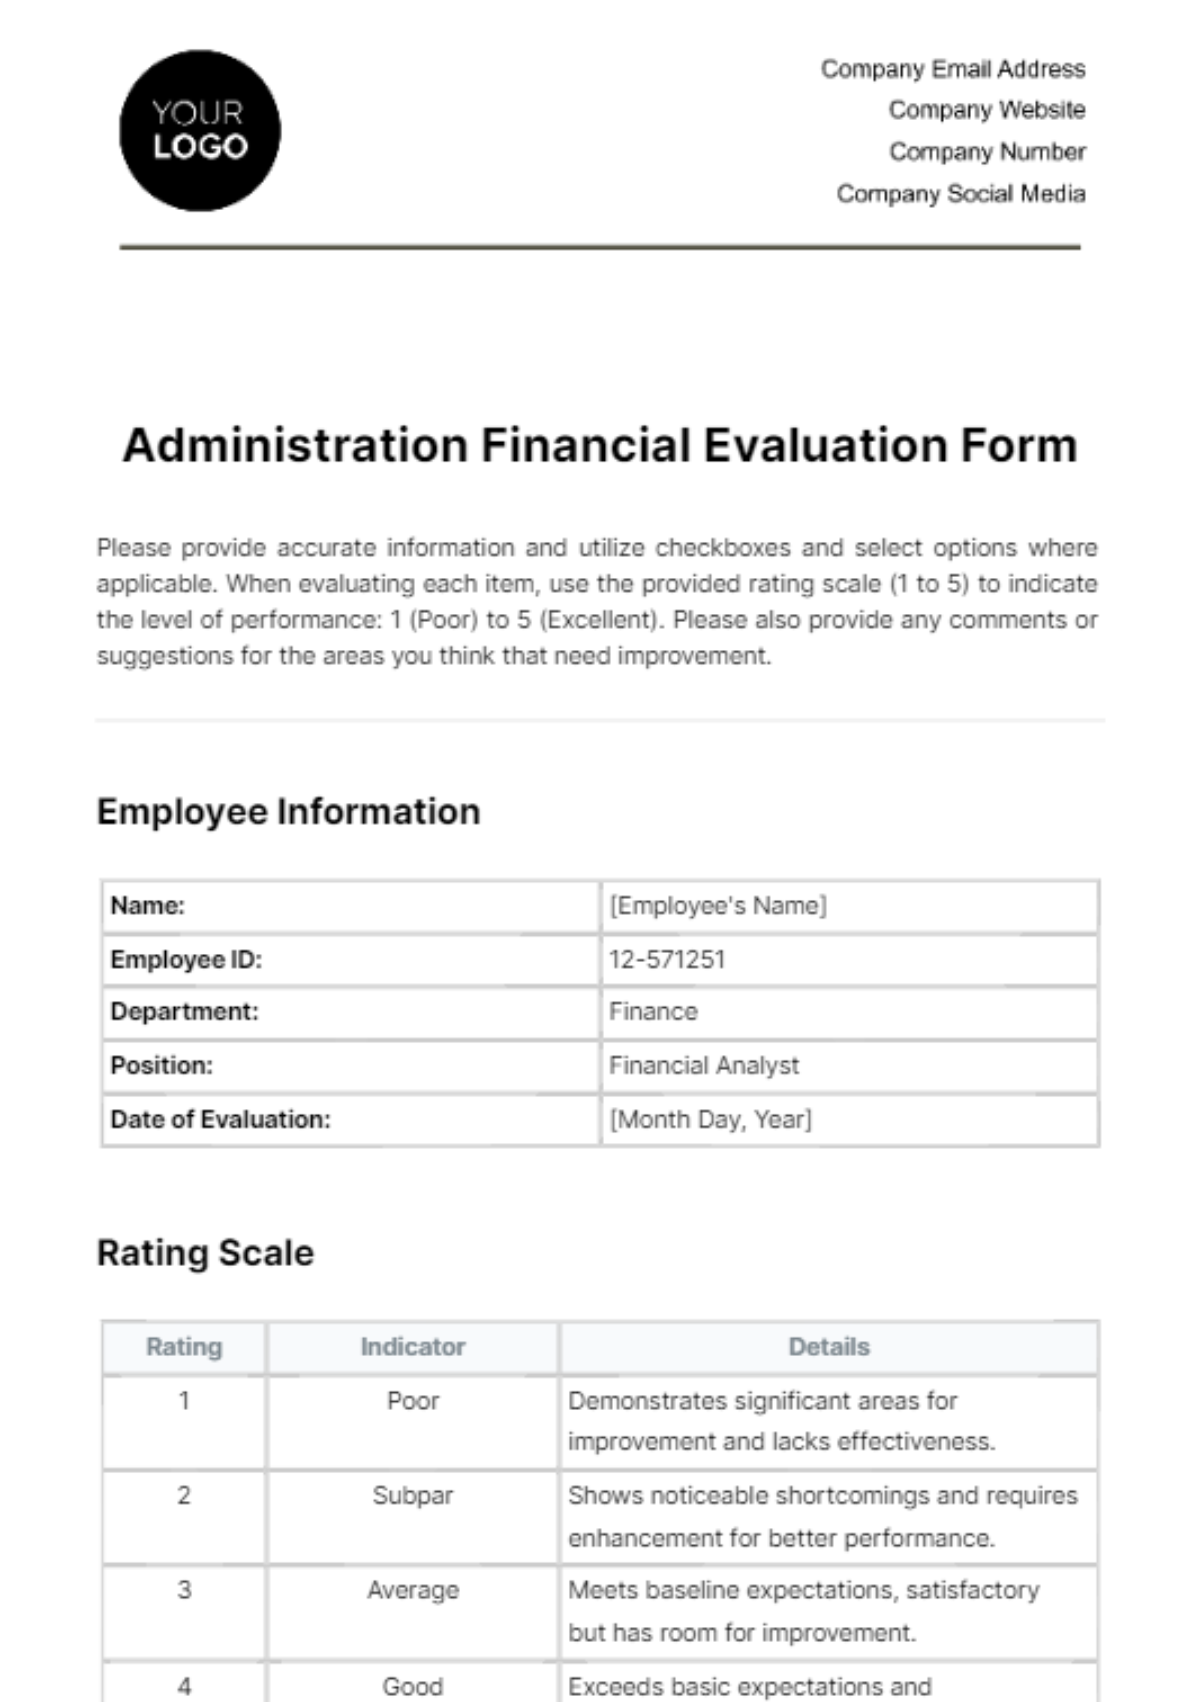 Administration Financial Evaluation Form Template